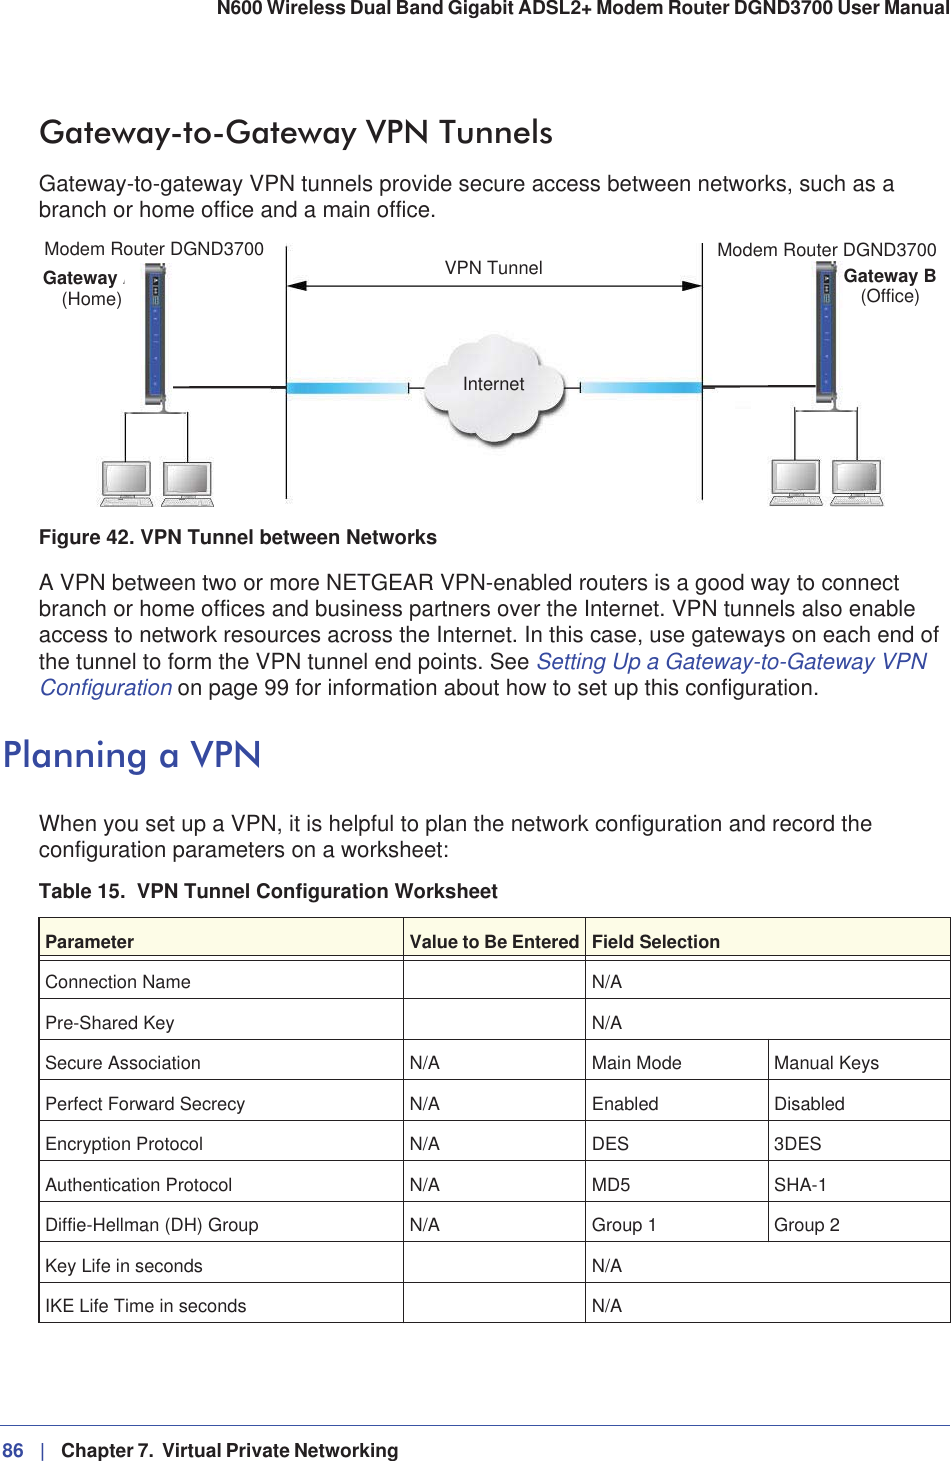 86 |   Chapter 7.  Virtual Private Networking N600 Wireless Dual Band Gigabit ADSL2+ Modem Router DGND3700 User Manual Gateway-to-Gateway VPN TunnelsGateway-to-gateway VPN tunnels provide secure access between networks, such as a branch or home office and a main office.VPN TunnelInternetModem Router DGND3700Gateway A (Home)Modem Router DGND3700Gateway B(Office)Figure 42. VPN Tunnel between NetworksA VPN between two or more NETGEAR VPN-enabled routers is a good way to connect branch or home offices and business partners over the Internet. VPN tunnels also enable access to network resources across the Internet. In this case, use gateways on each end of the tunnel to form the VPN tunnel end points. See Setting Up a Gateway-to-Gateway VPN Configuration on page 99 for information about how to set up this configuration.Planning a VPNWhen you set up a VPN, it is helpful to plan the network configuration and record the configuration parameters on a worksheet:Table 15.  VPN Tunnel Configuration WorksheetParameter Value to Be Entered Field SelectionConnection Name N/APre-Shared Key N/ASecure Association N/A Main Mode Manual KeysPerfect Forward Secrecy N/A Enabled DisabledEncryption Protocol N/A DES 3DESAuthentication Protocol N/A MD5 SHA-1Diffie-Hellman (DH) Group N/A Group 1 Group 2Key Life in seconds N/AIKE Life Time in seconds N/A